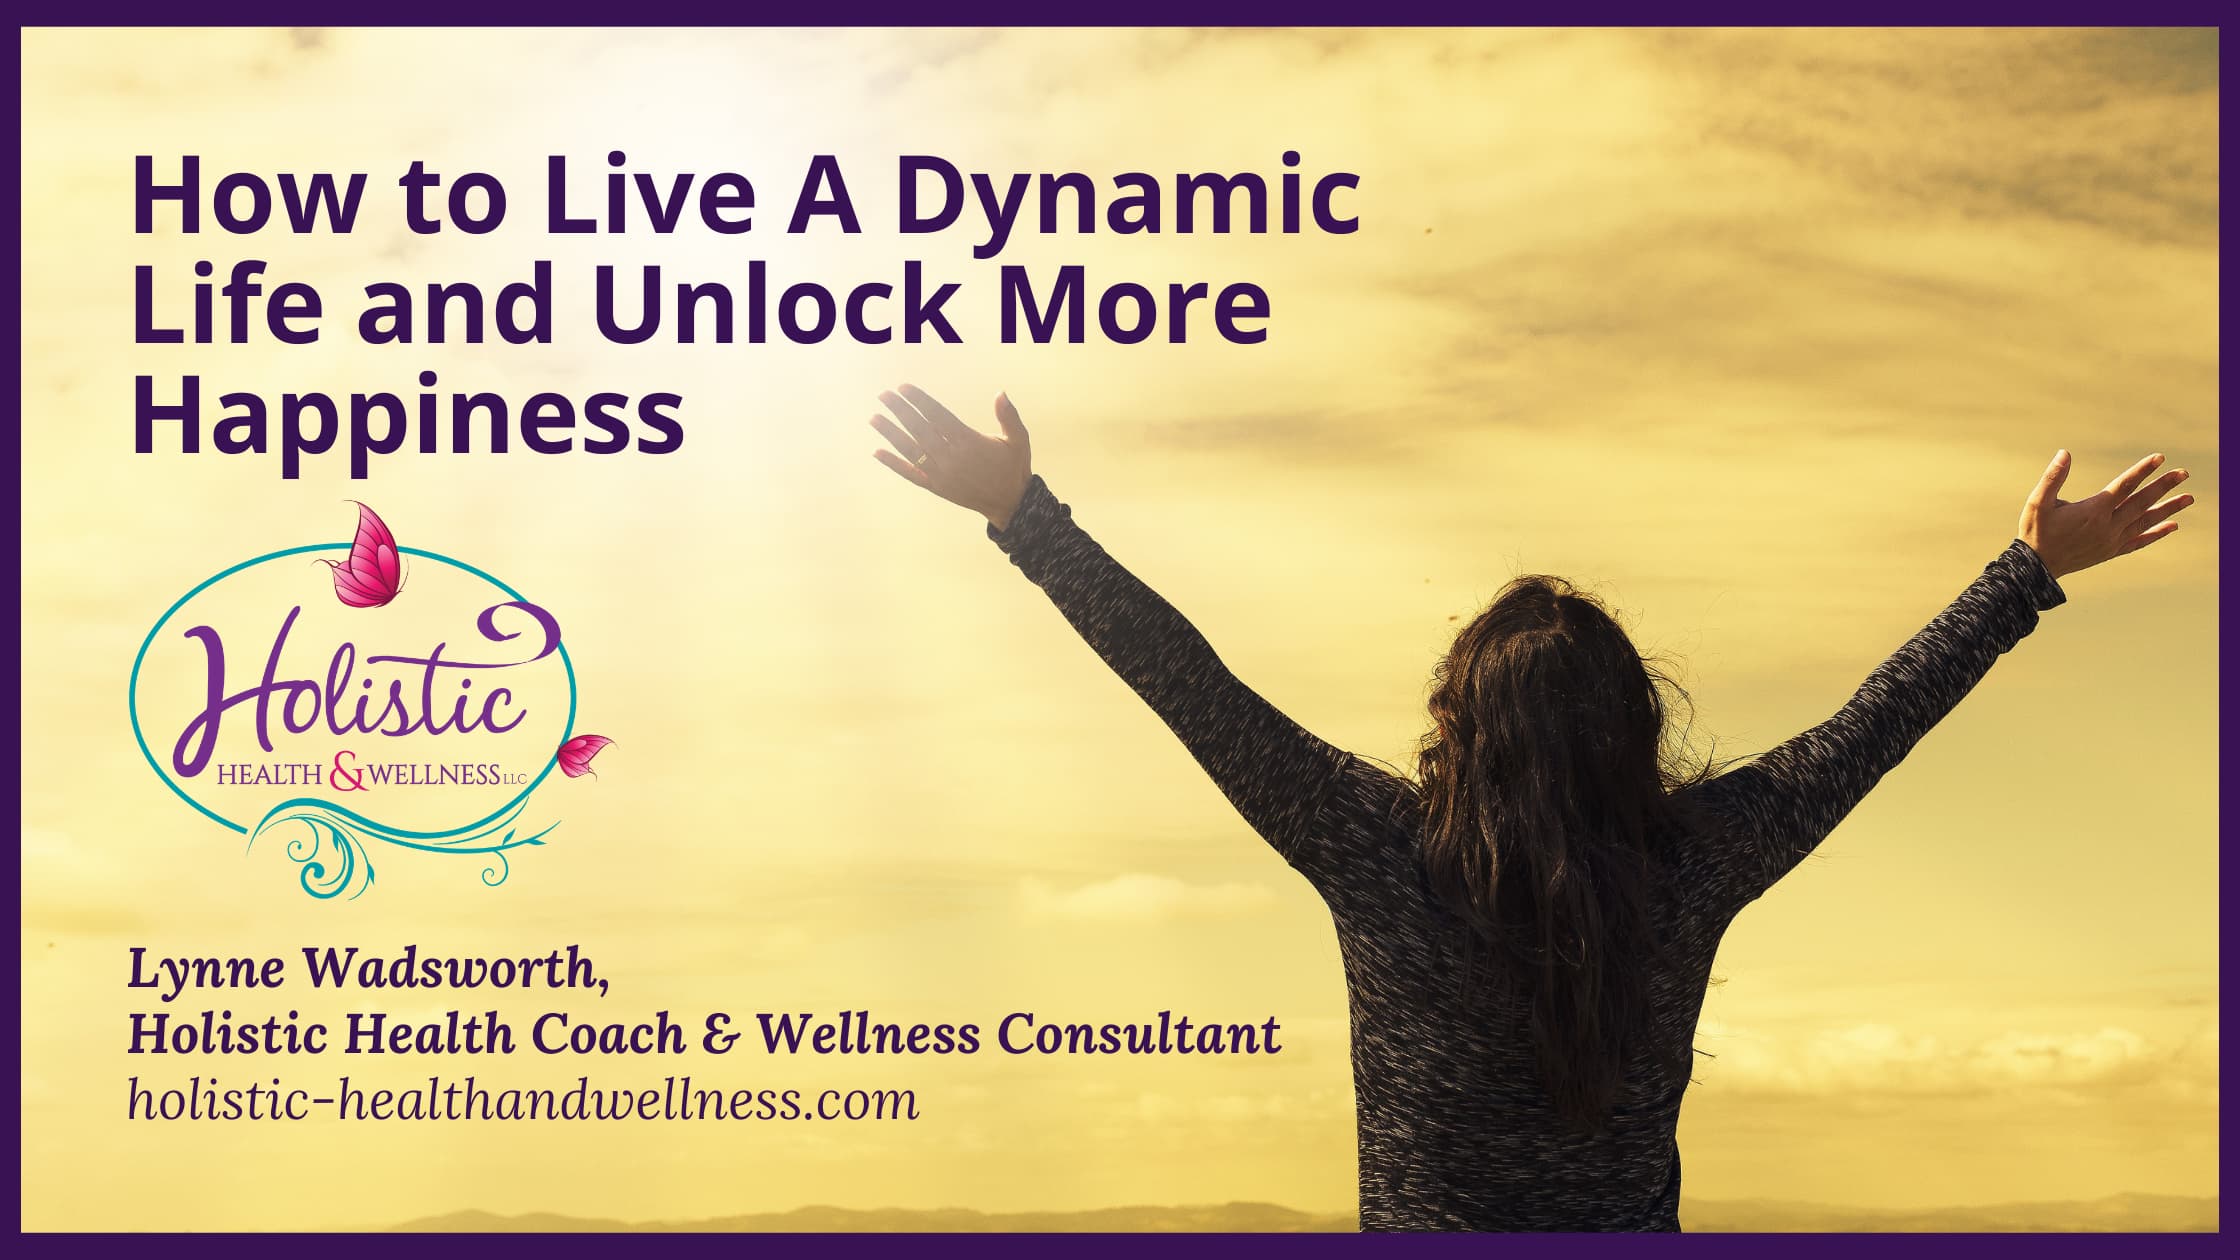 How to Live A Dynamic Life and Unlock More Happiness